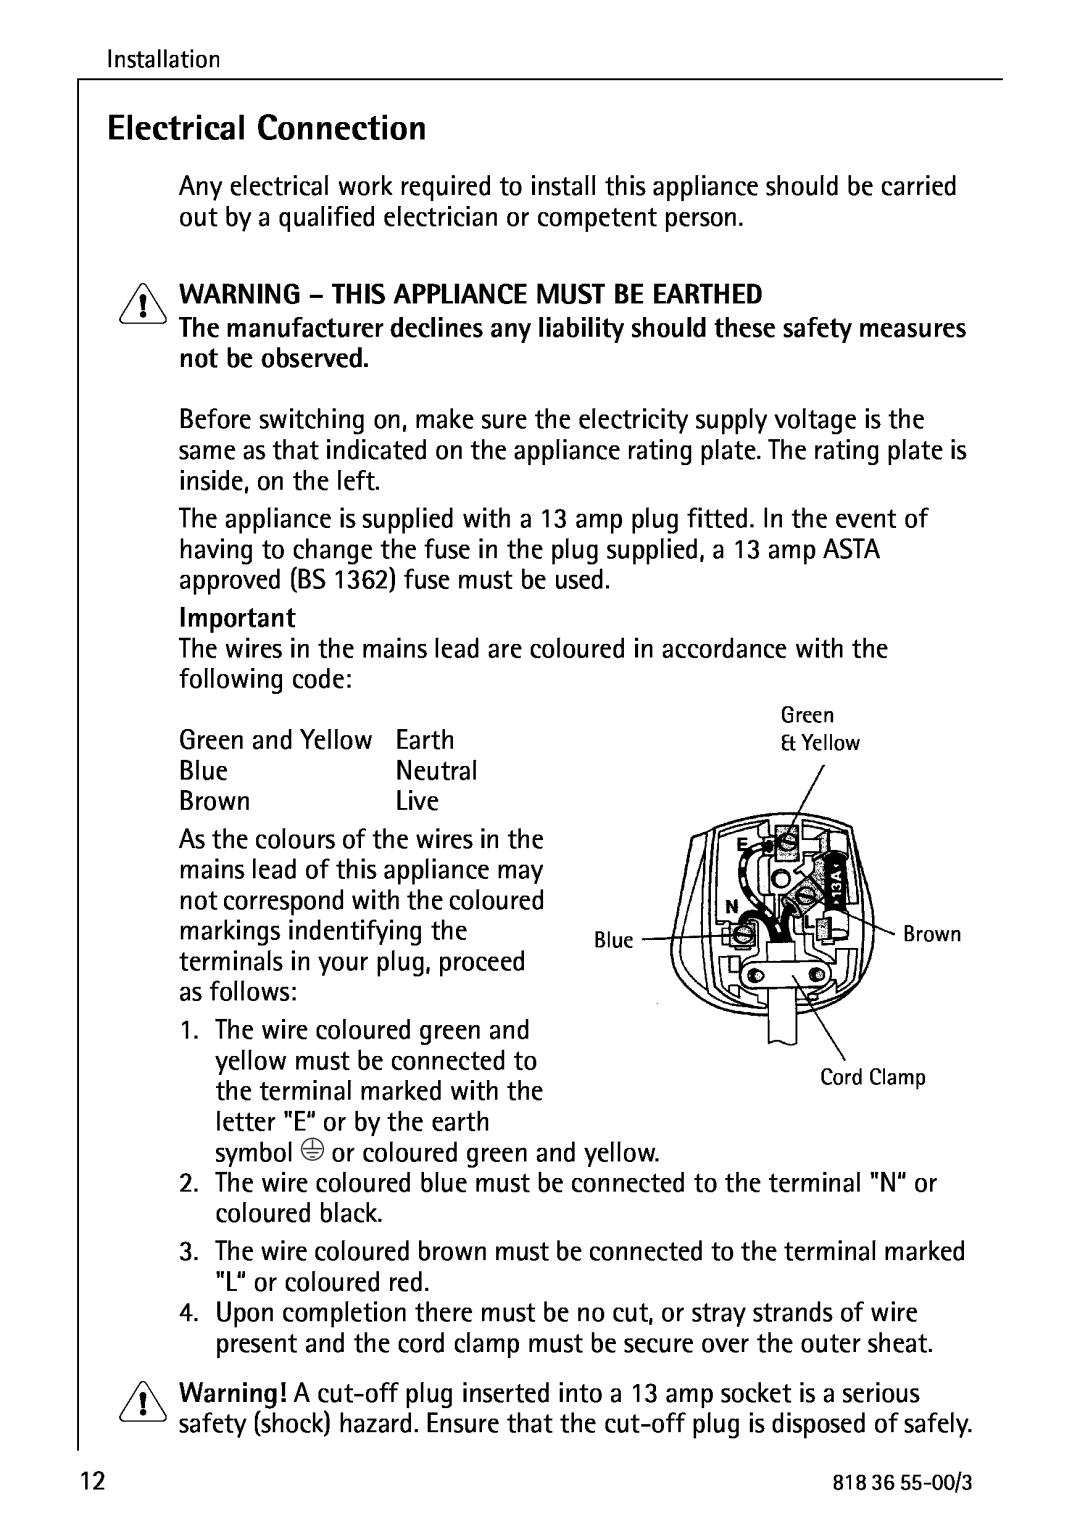 AEG 86378-KG operating instructions Electrical Connection, Warning - This Appliance Must Be Earthed 